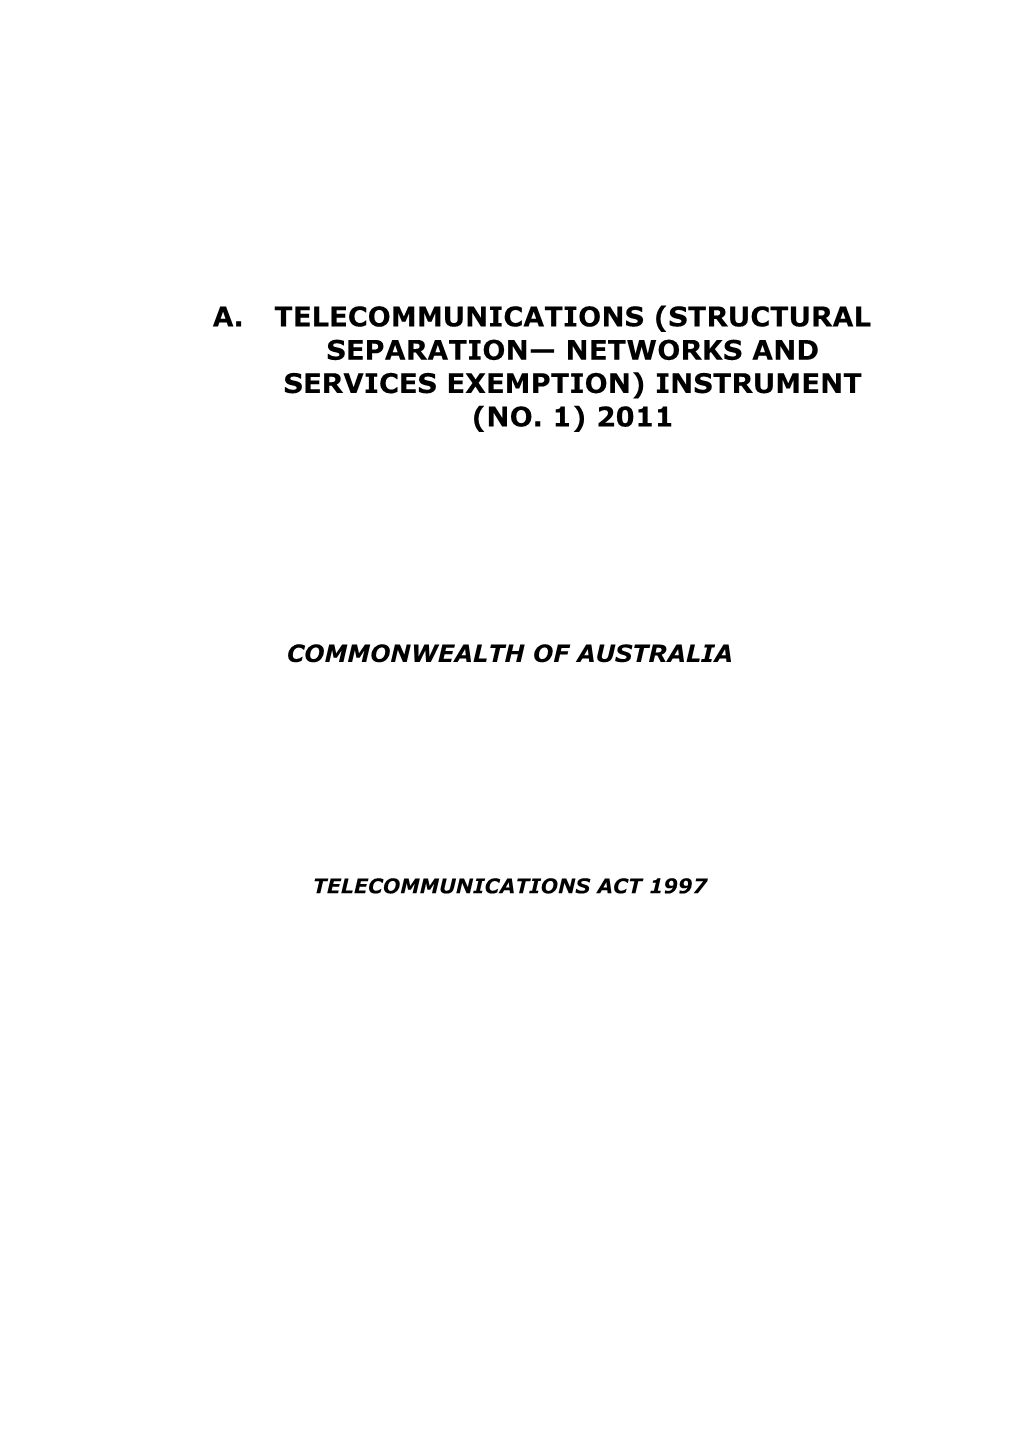 Telecommunications (Structural Separation Networks and Services Exemption) Instrument (No